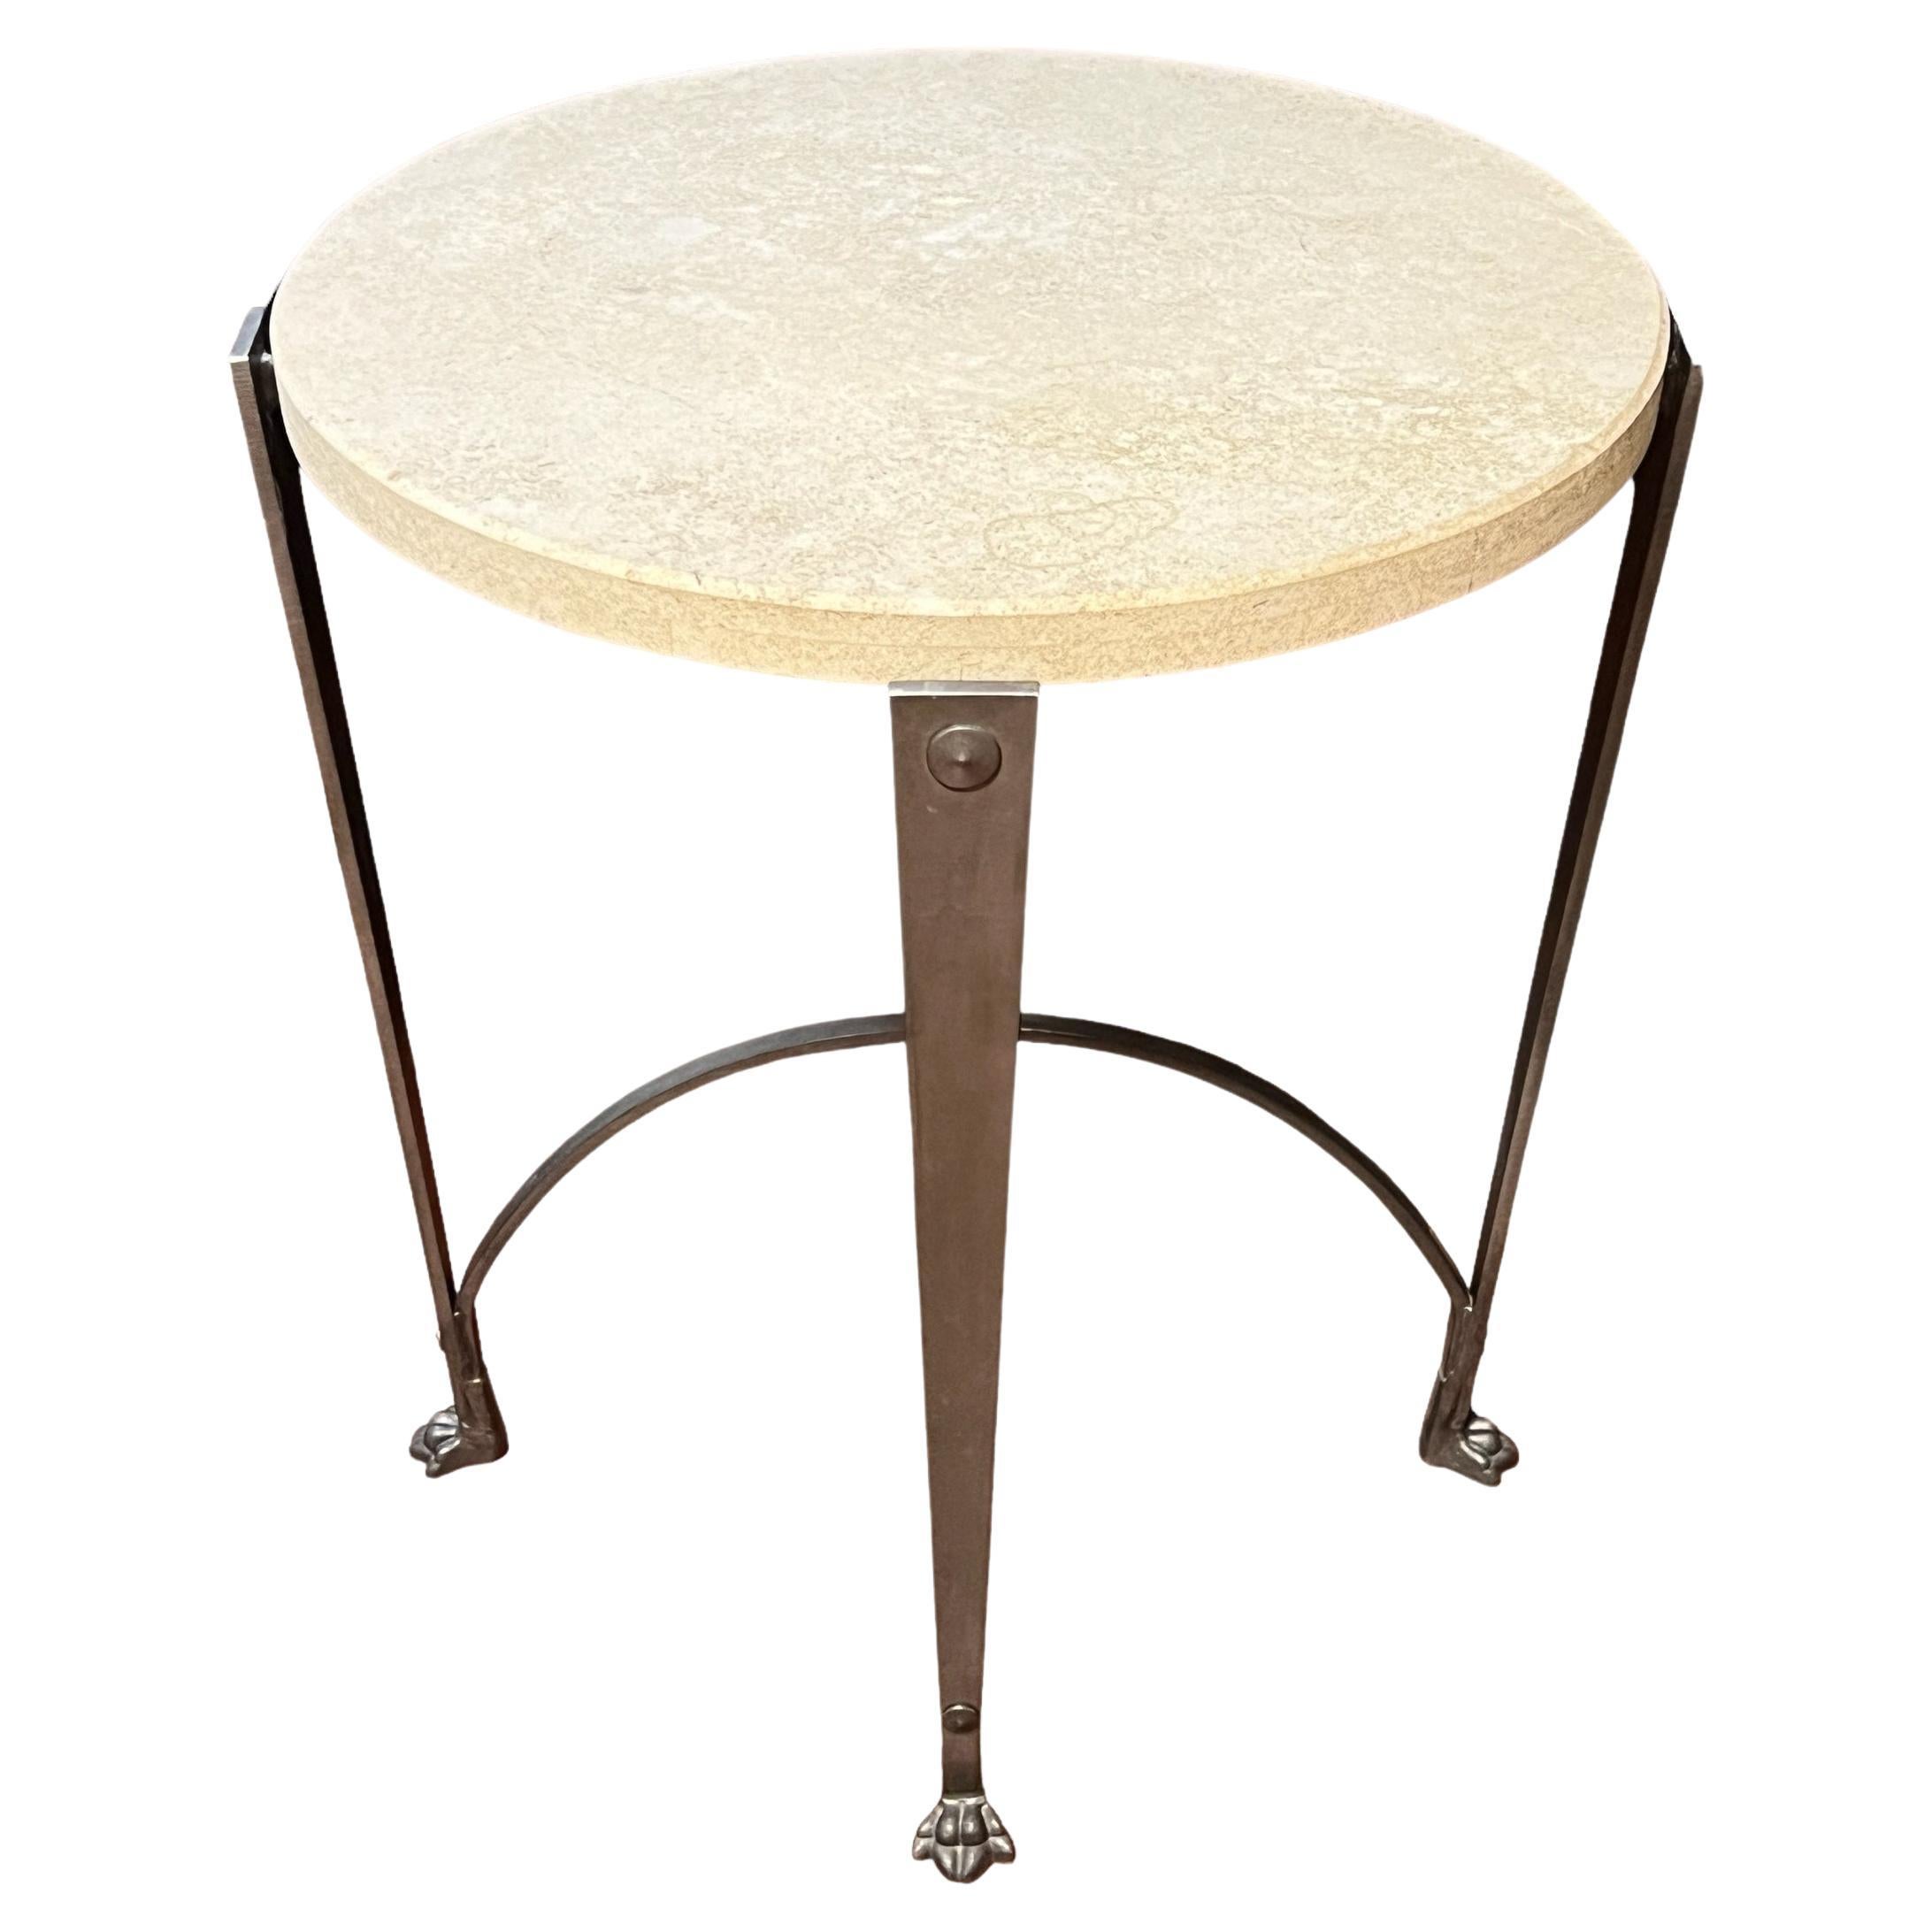 Vintage Circular Iron Side Table with Travertine Stone Top For Sale